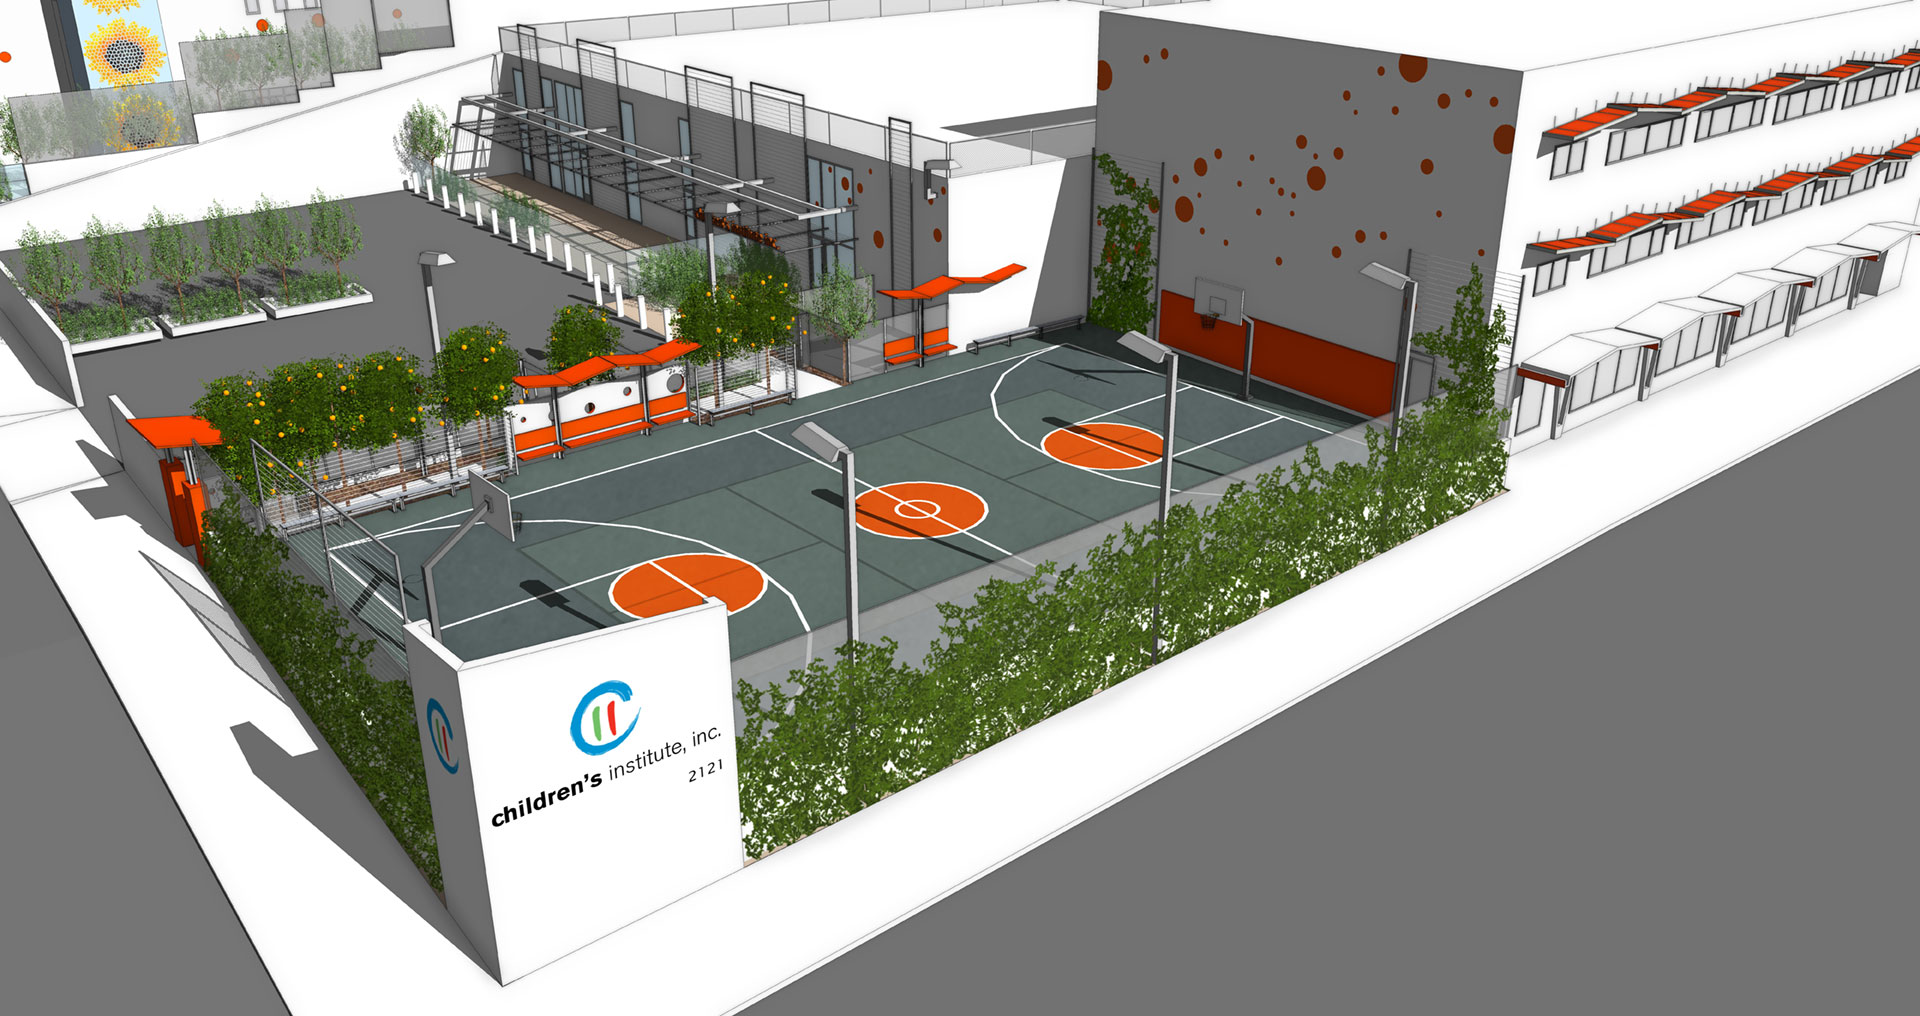 An aerial rendering of the Children’s institute Campus featuring the sports court.